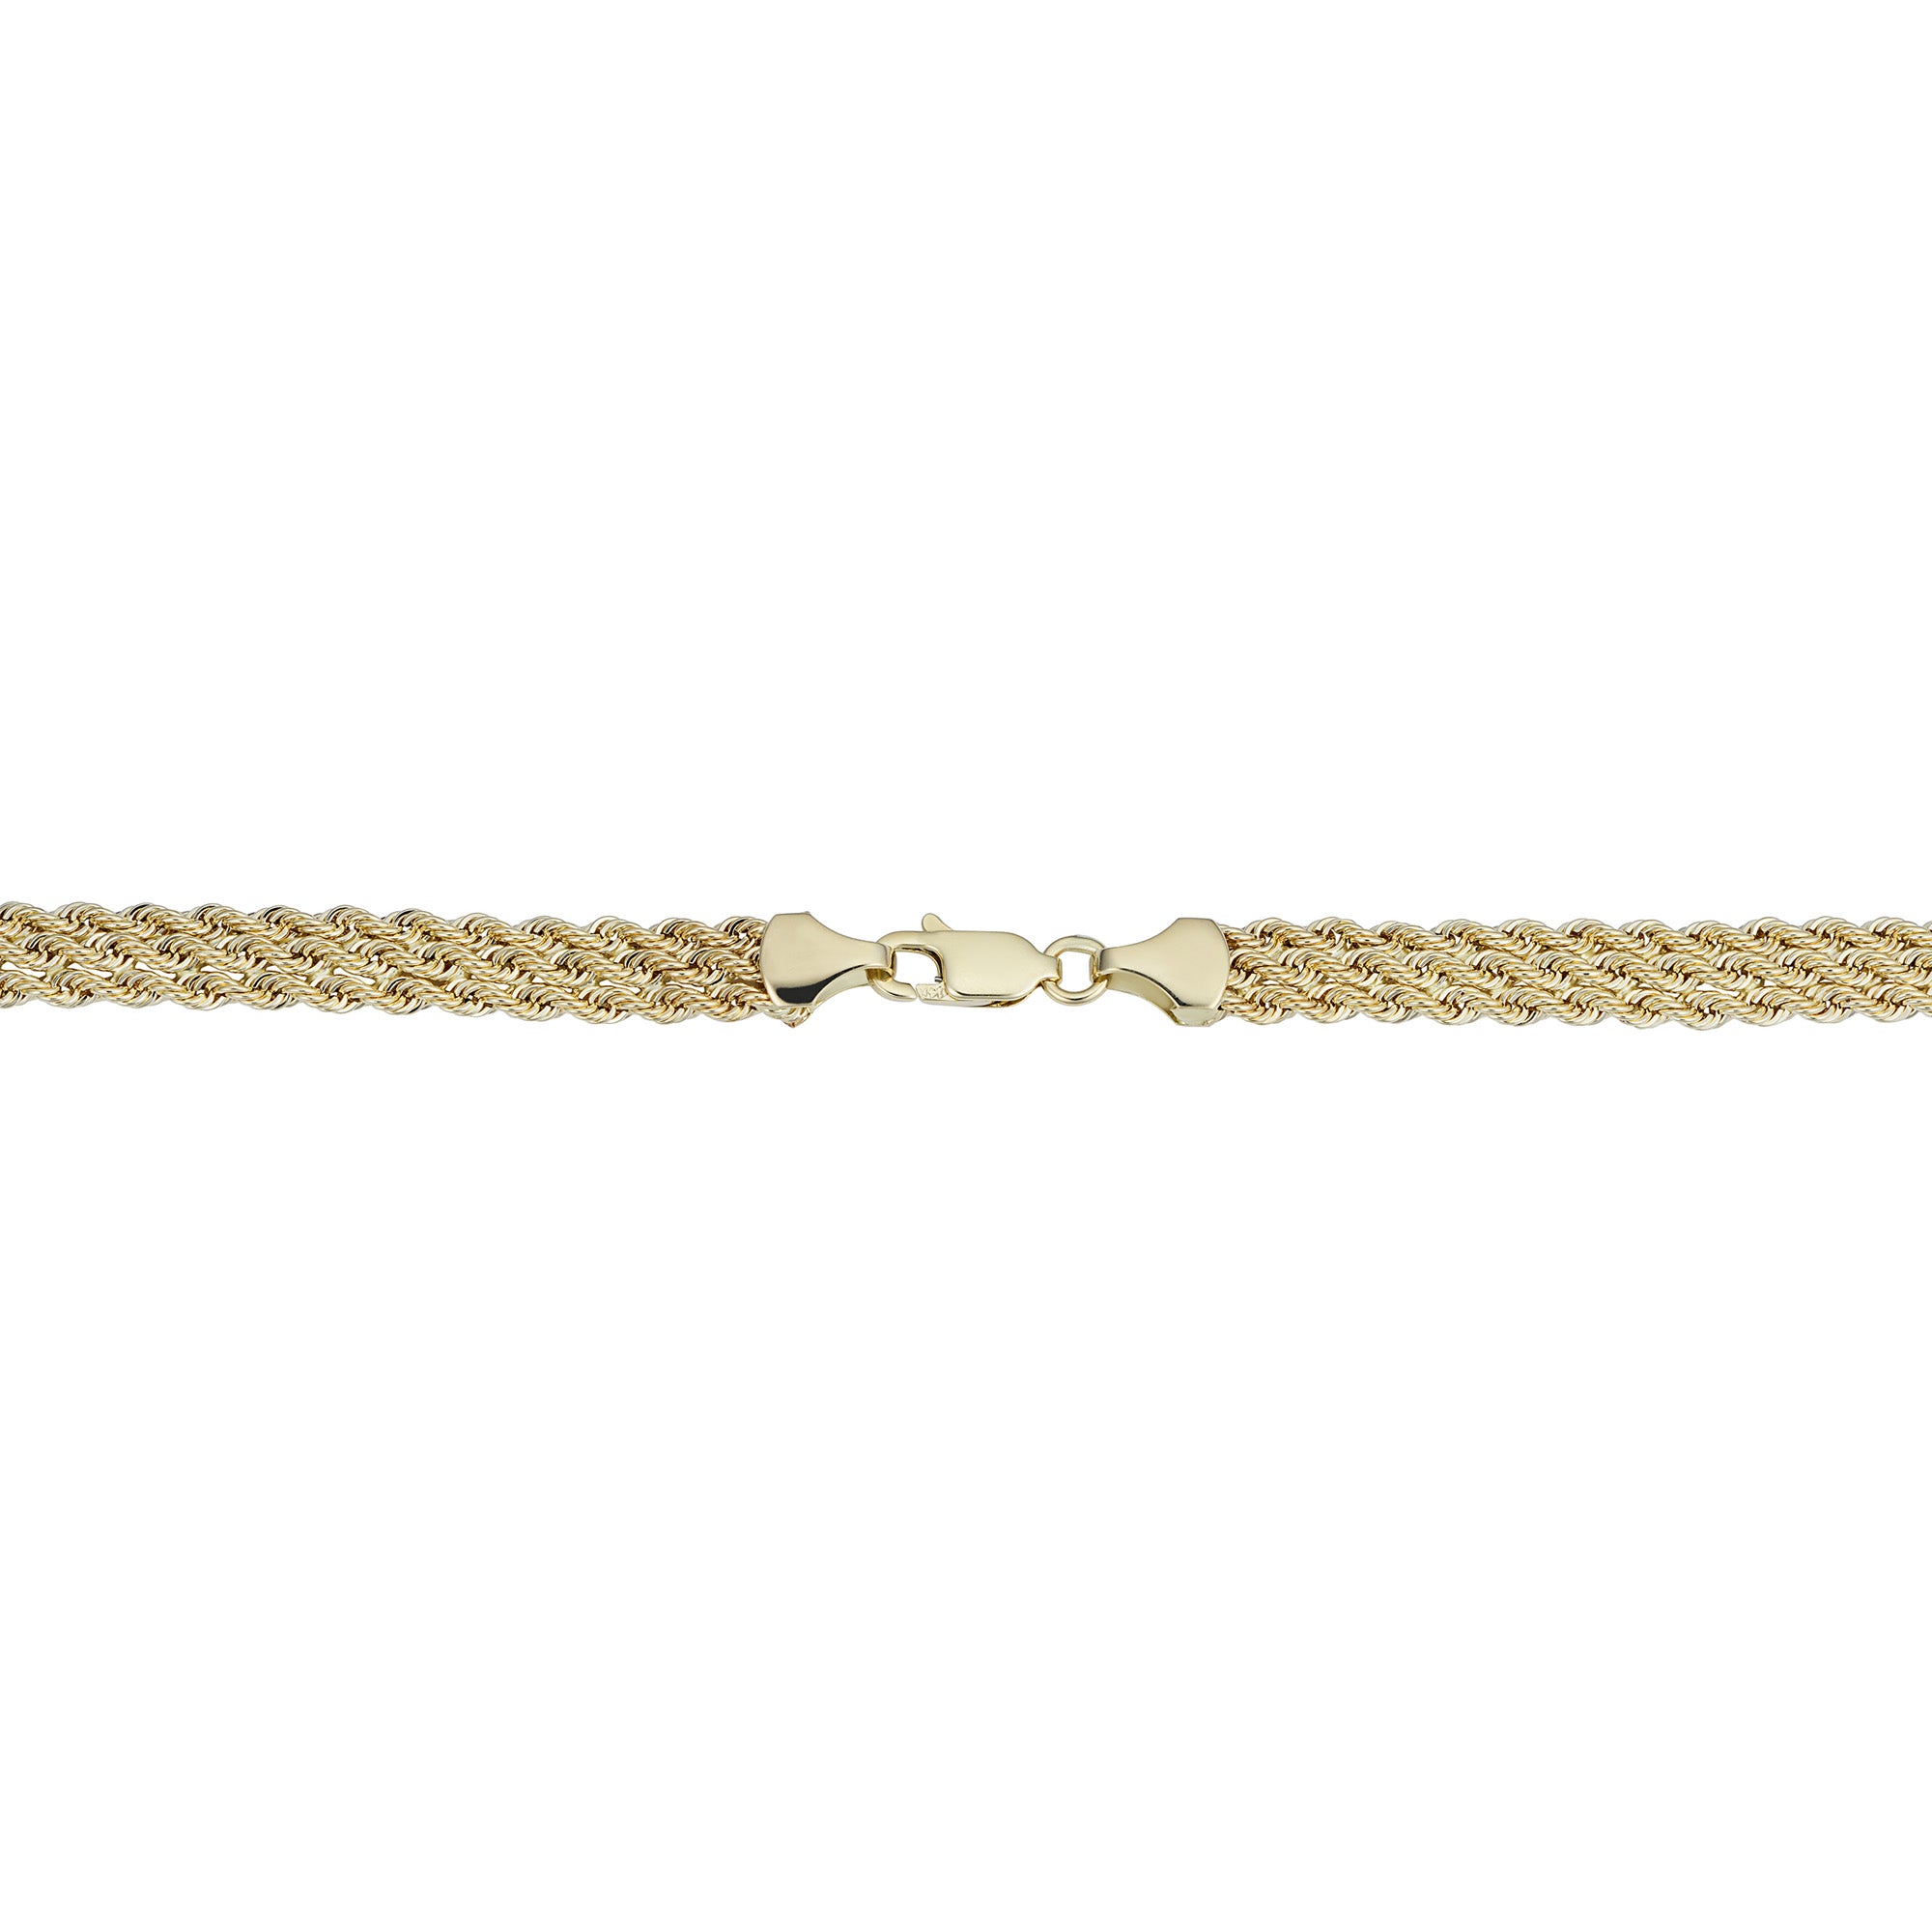 10k Yellow Gold Triple Row Semi Solid Rope Bracelet, 7.5" fine designer jewelry for men and women